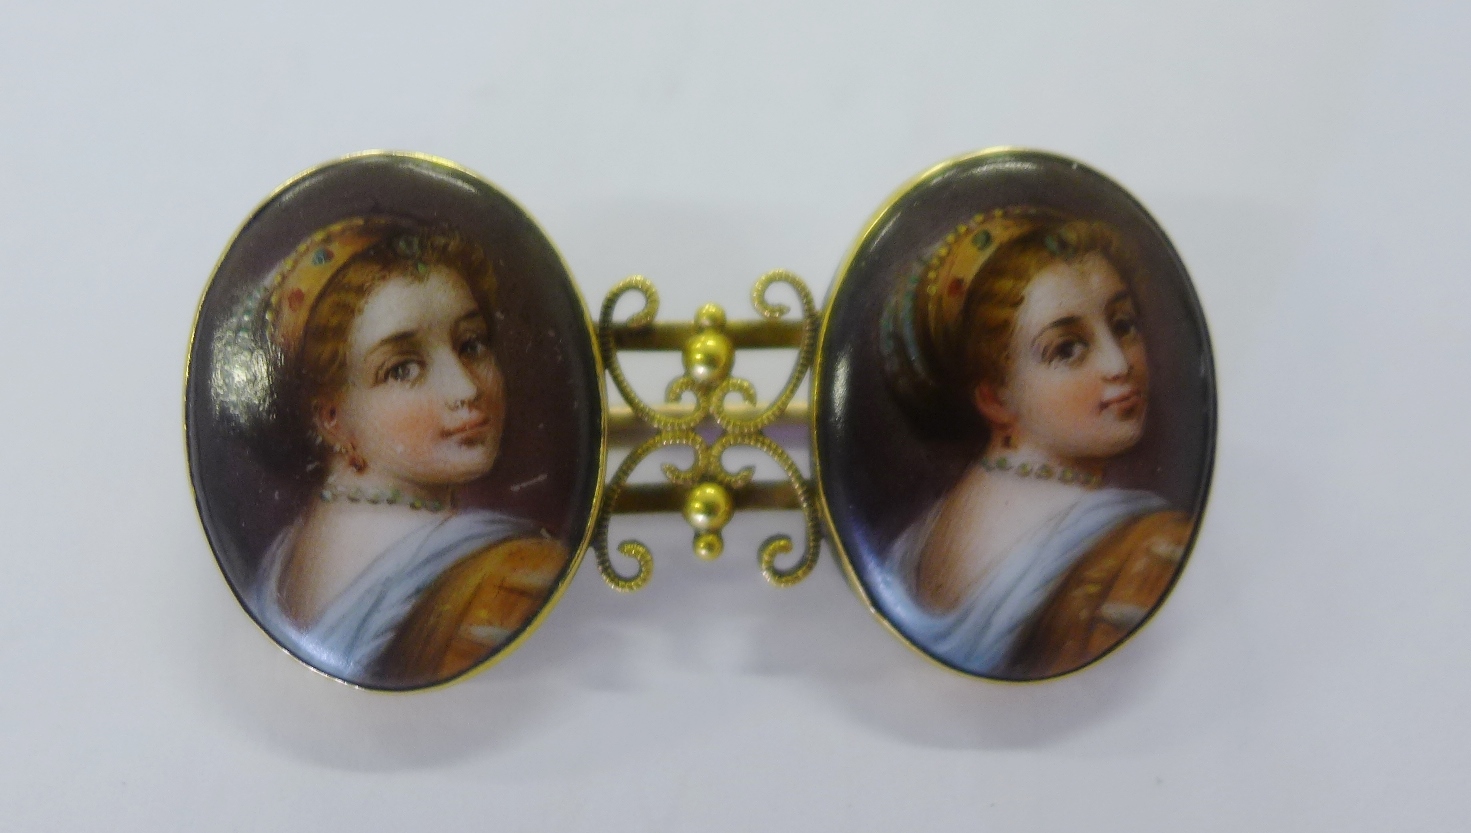 A 15ct gold bar brooch mounted with two oval porcelain plaques painted with a female looking over